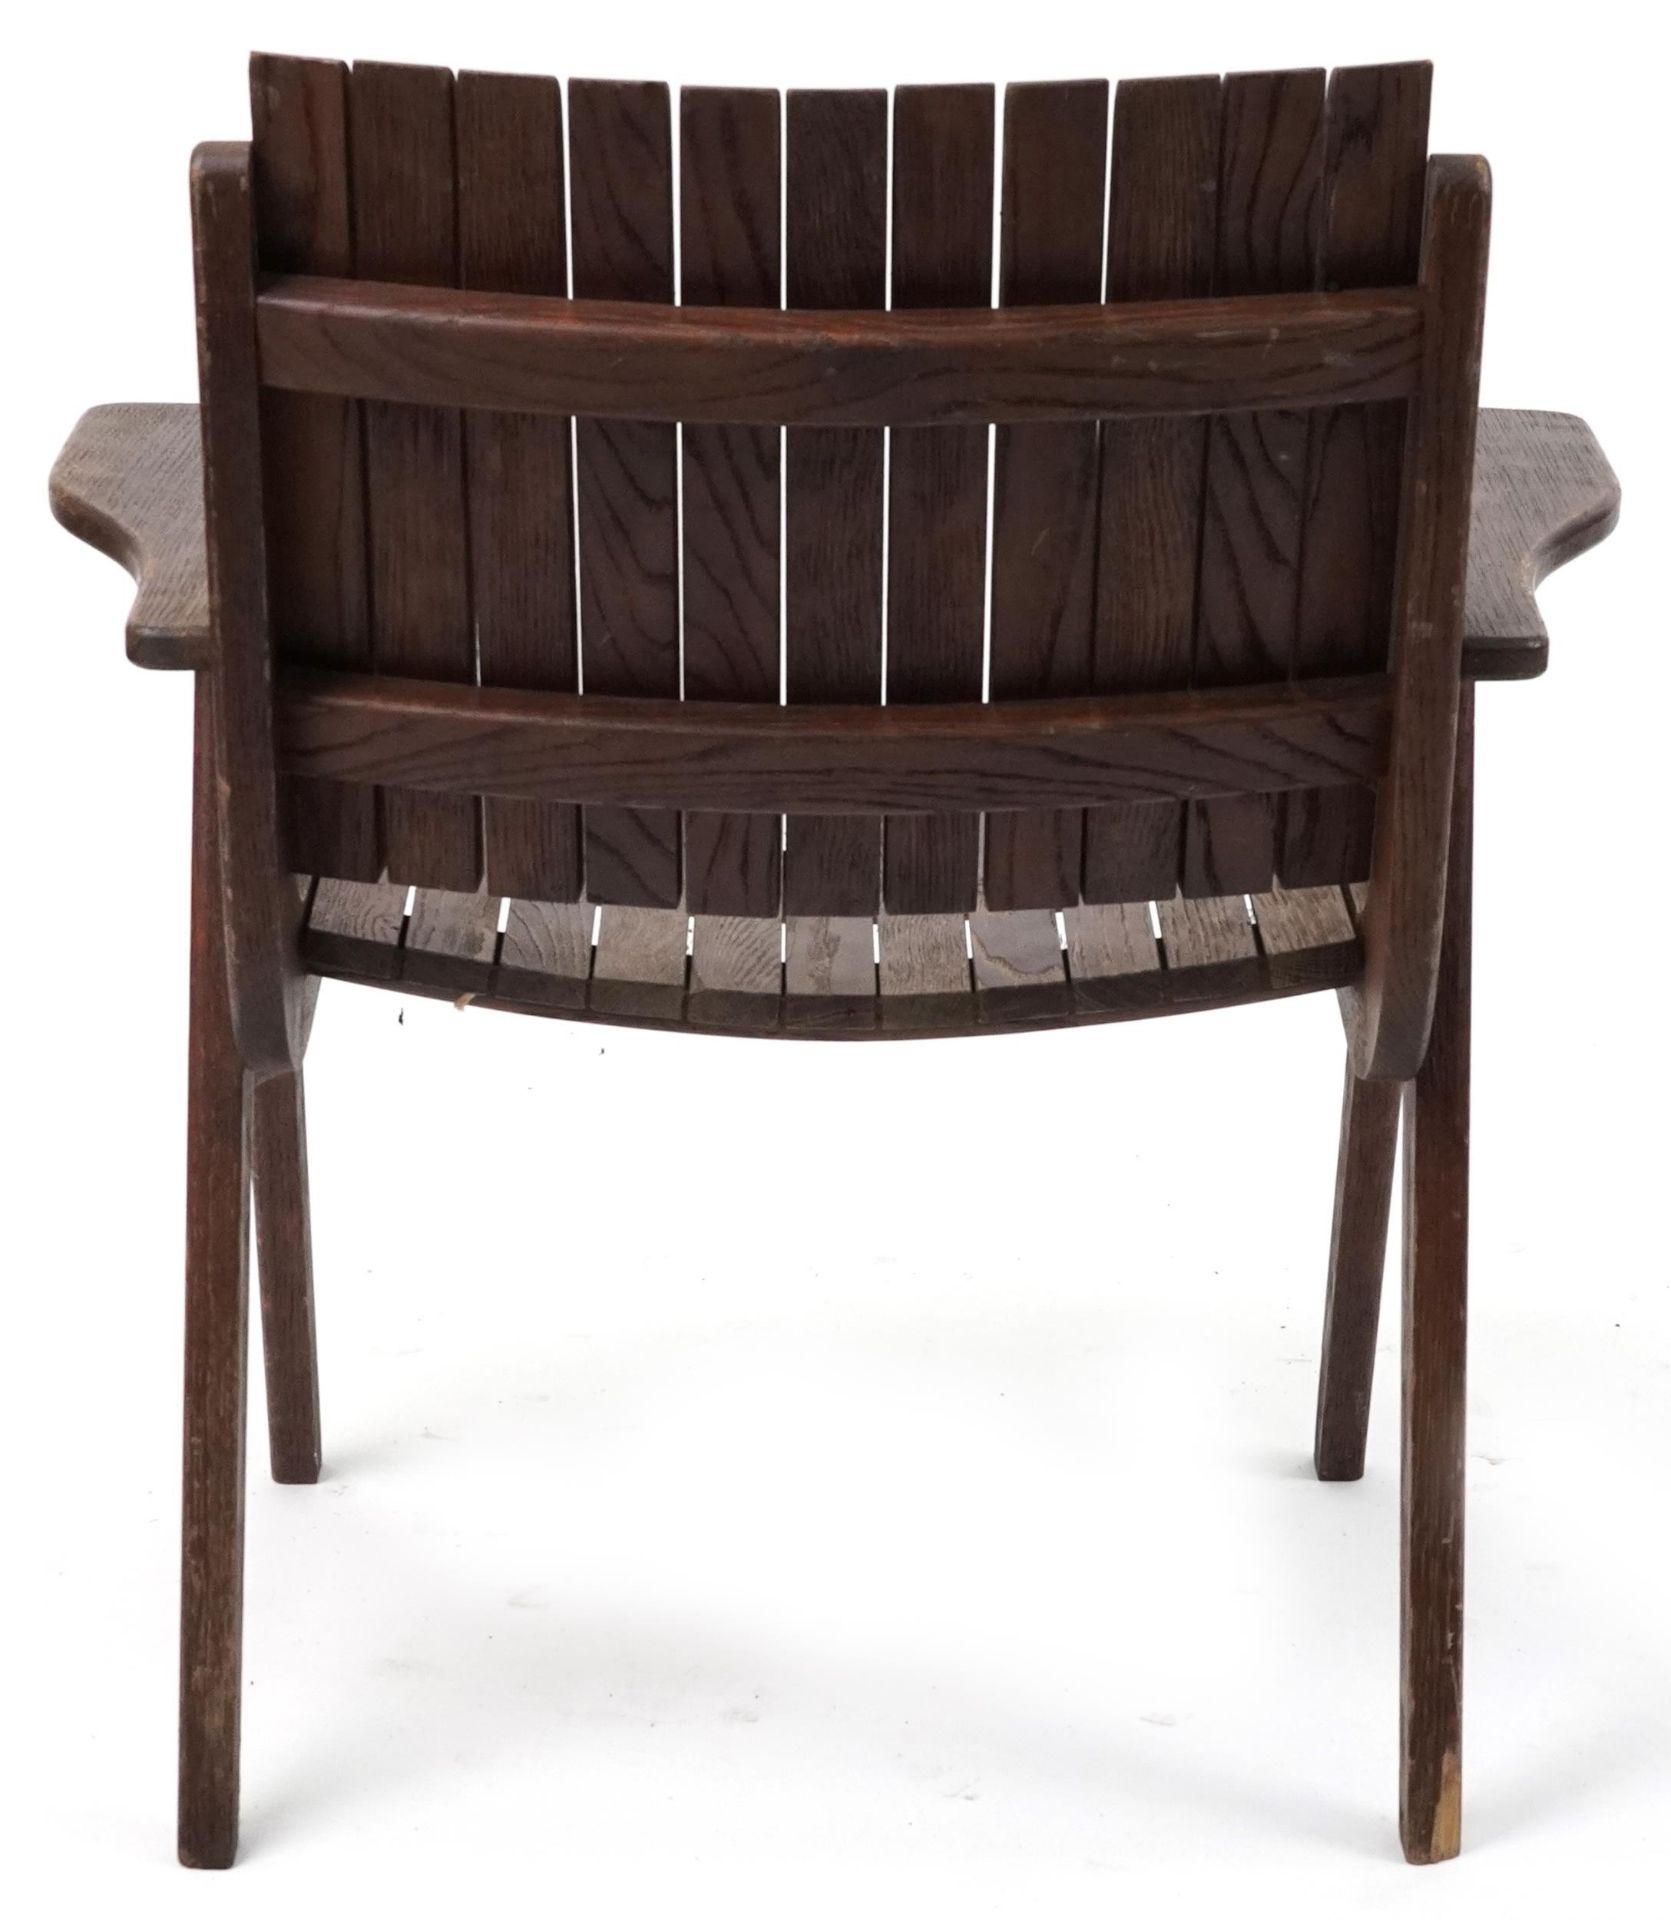 Autoban, stained teak slice chair, 81cm high - Image 4 of 4